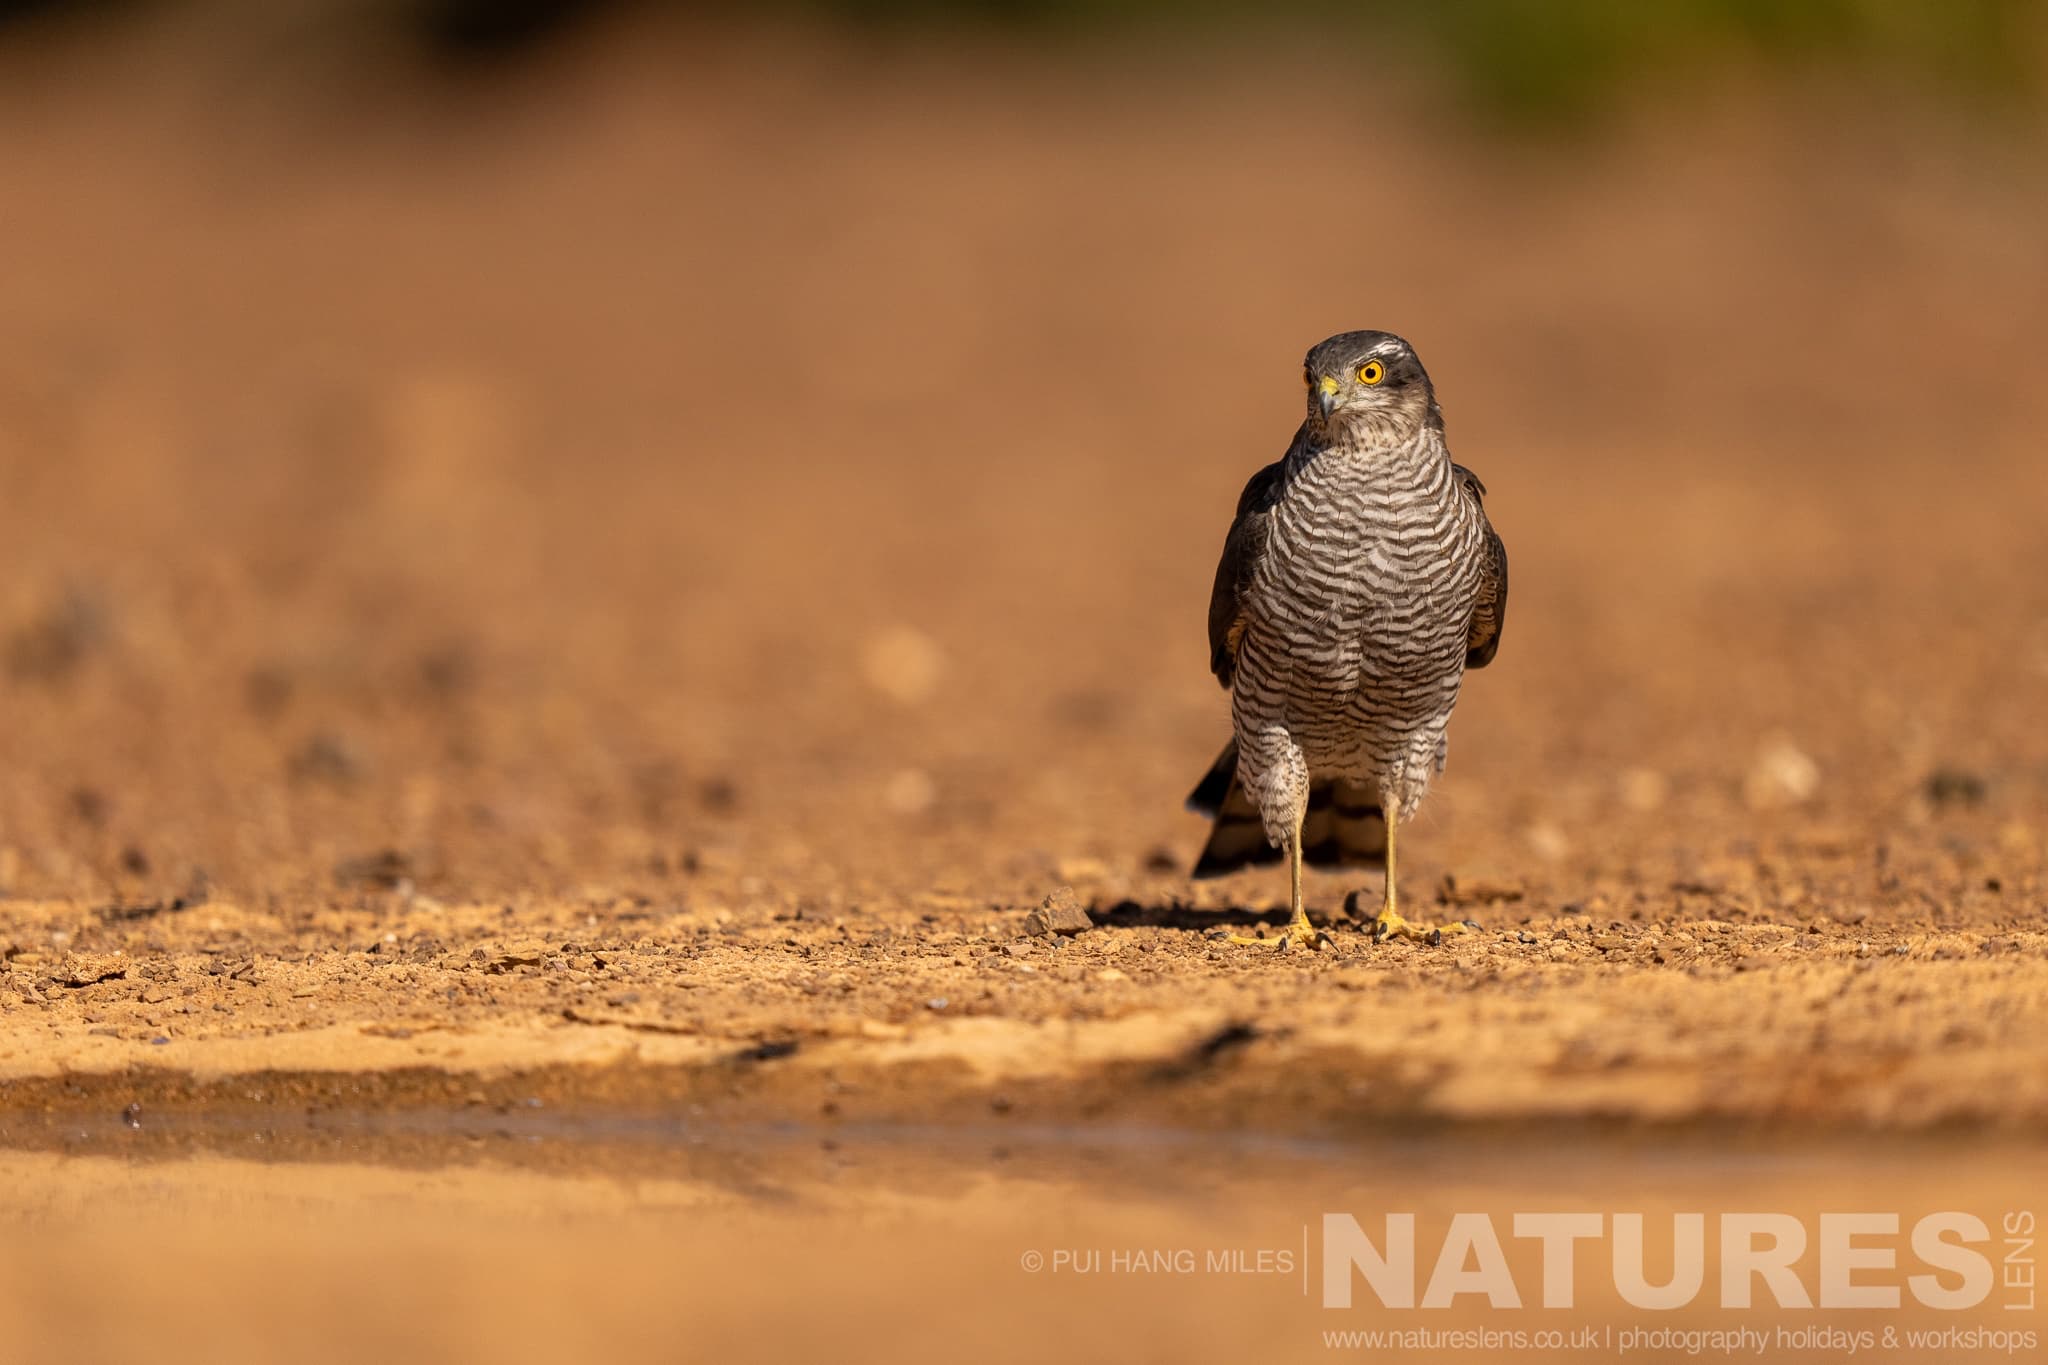 A Sparrowhawk Photographed During One Of The Natureslens Lynx Photography Scouting Trips